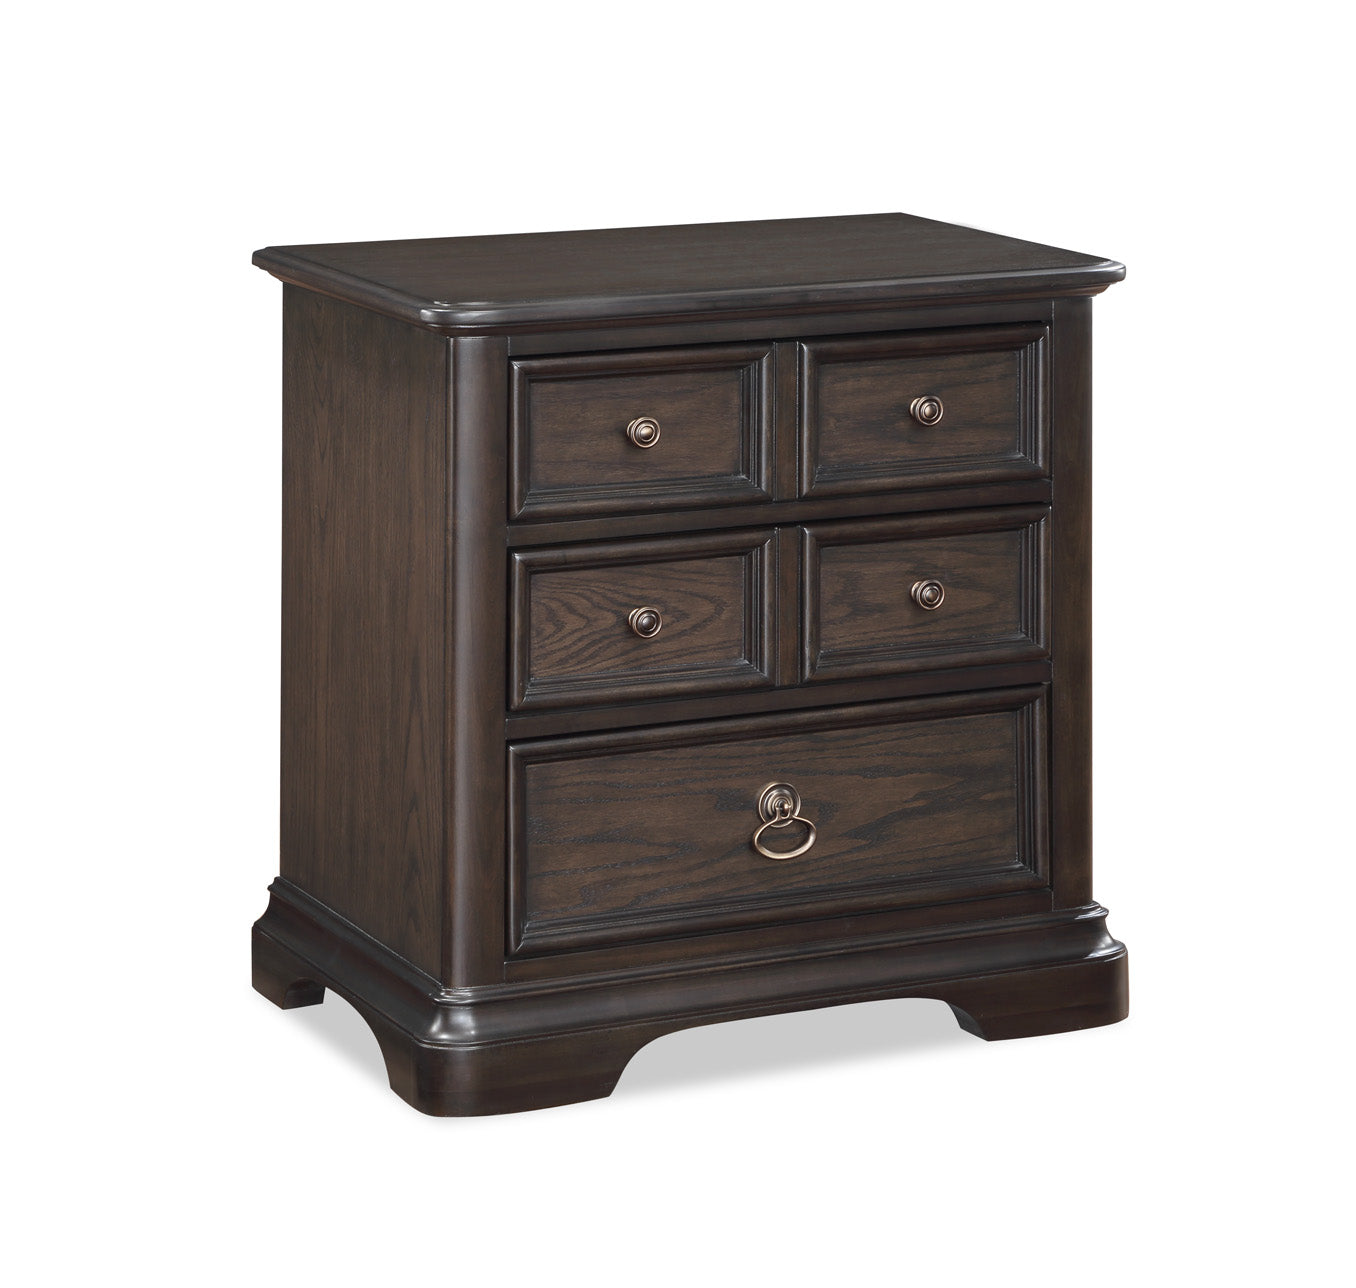 Duke Night Stand Brown, Transitional Wood, 3 Spacious Drawers